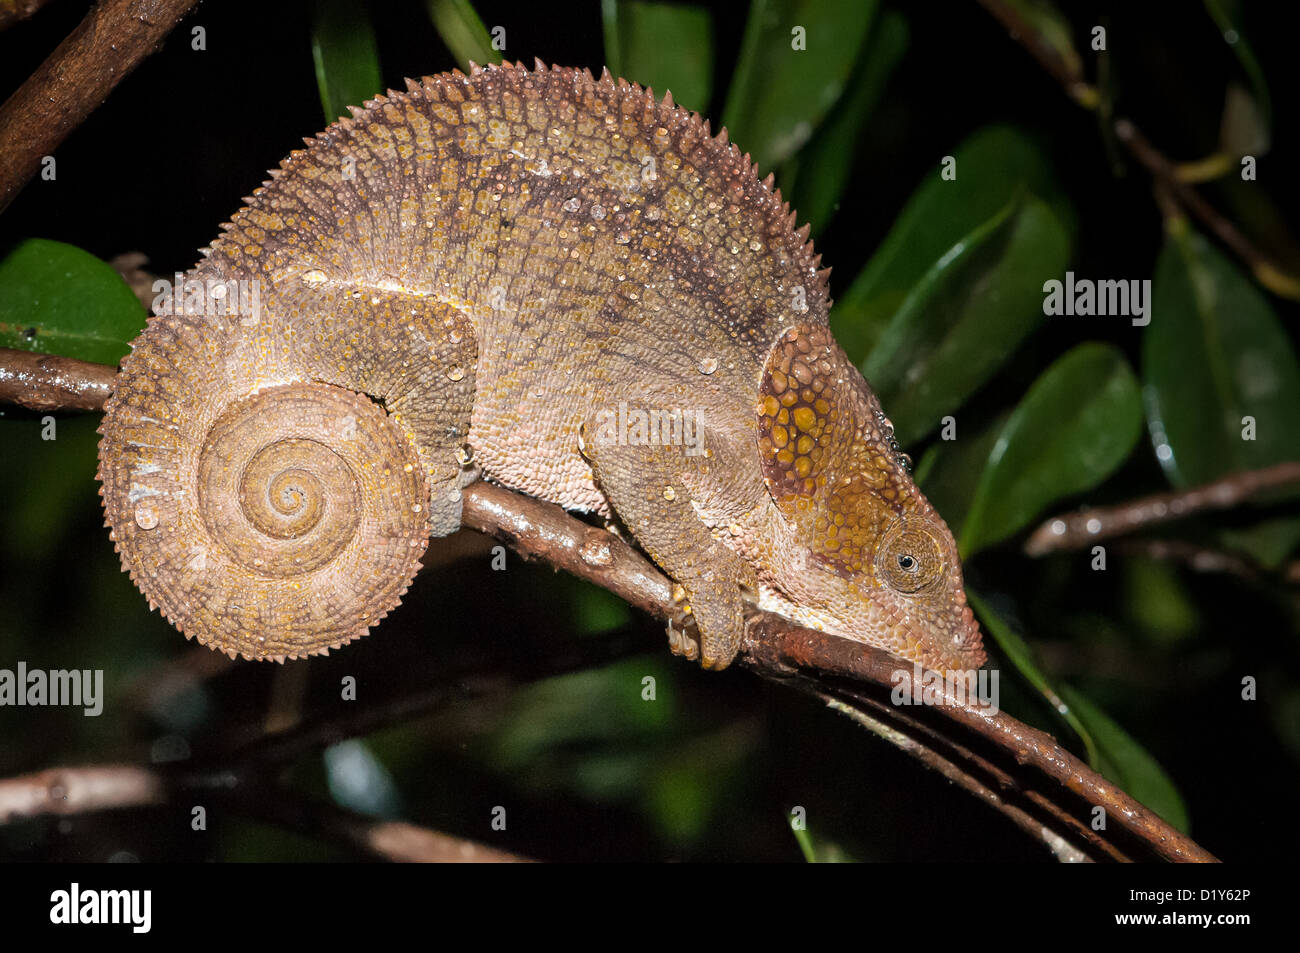 Wild chameleon (Calumma brevicorne) on a tree branch with water drops Stock Photo